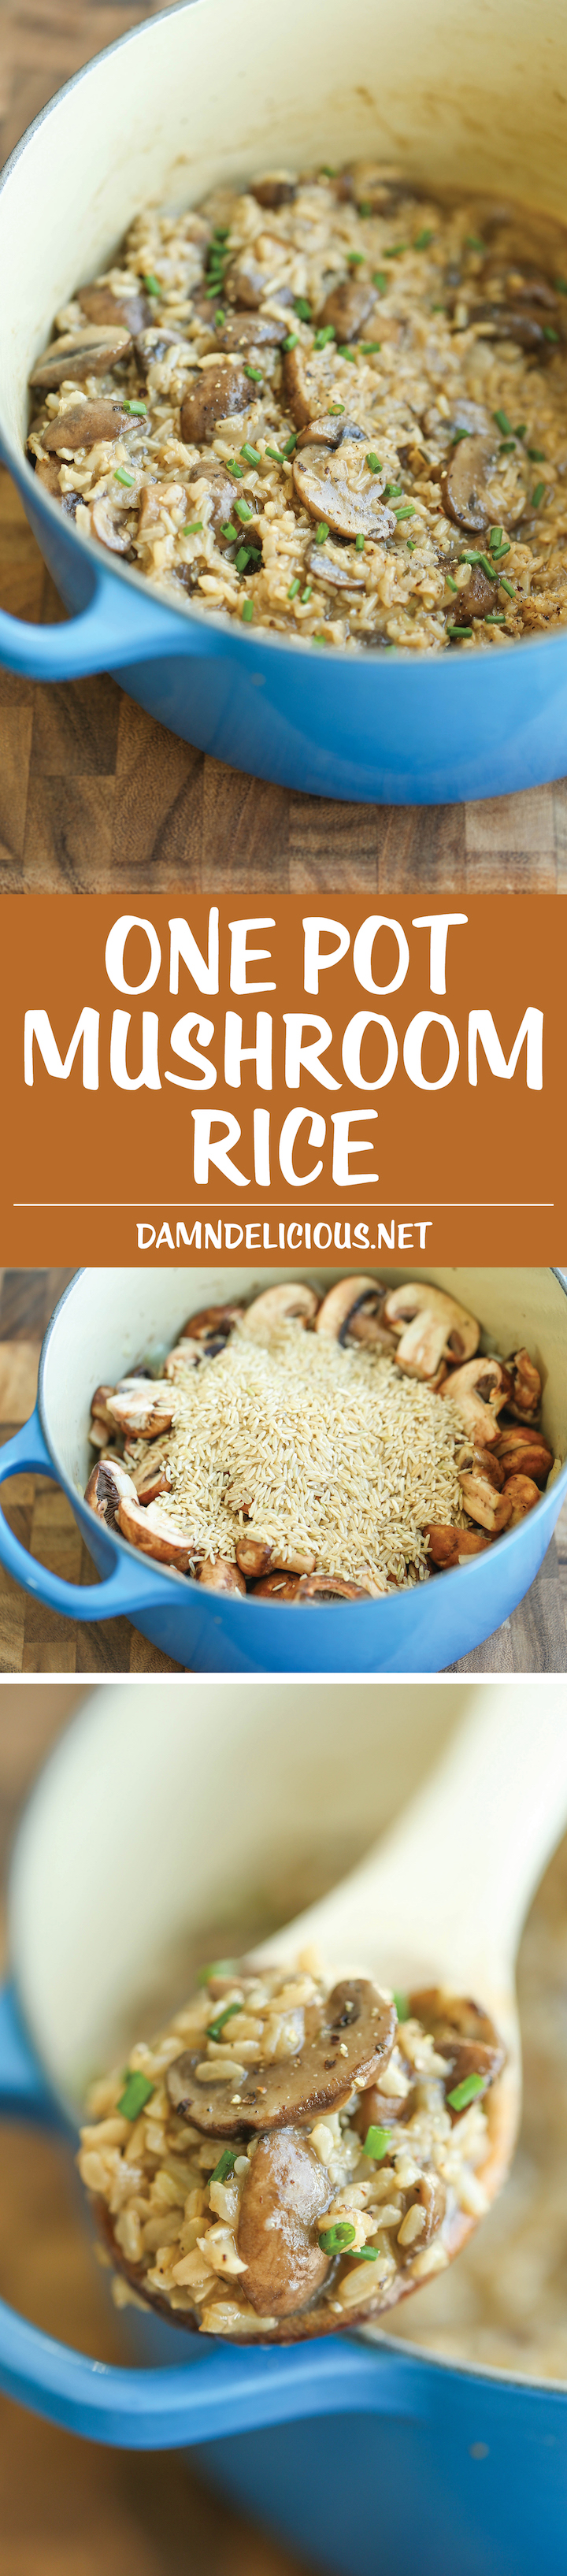 One Pot Mushroom Rice - Easy peasy mushroom rice made in one pot. Really! Even the rice gets cooked right in! It's so creamy and packed with so much flavor!